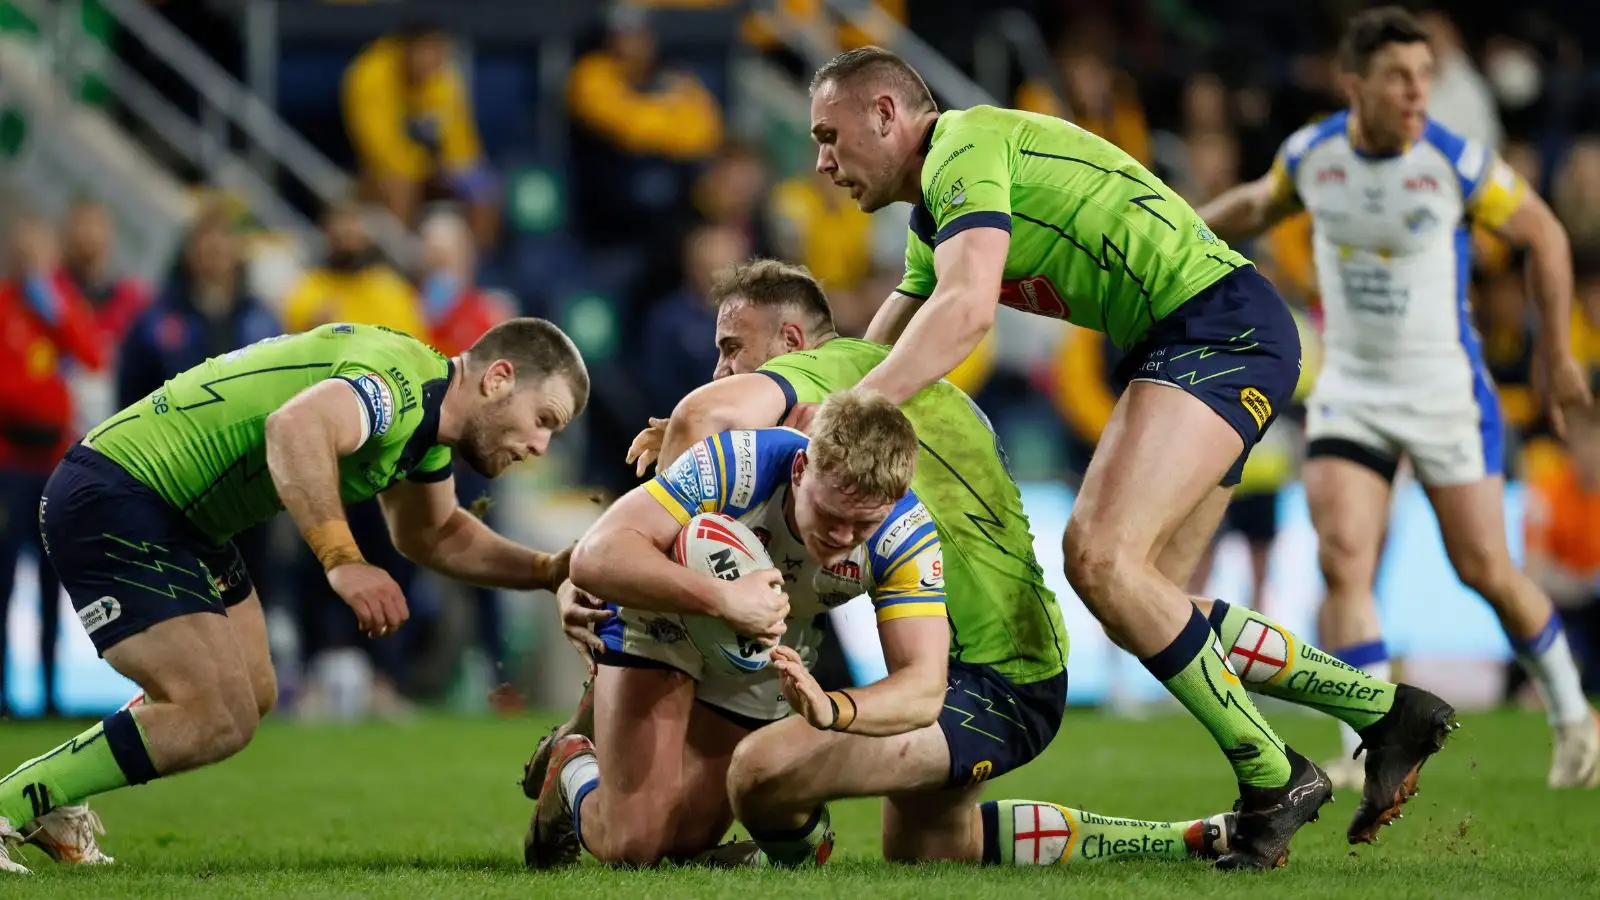 Warrington Wolves star praised by pundits after ‘outstanding’ display in Leeds Rhinos win